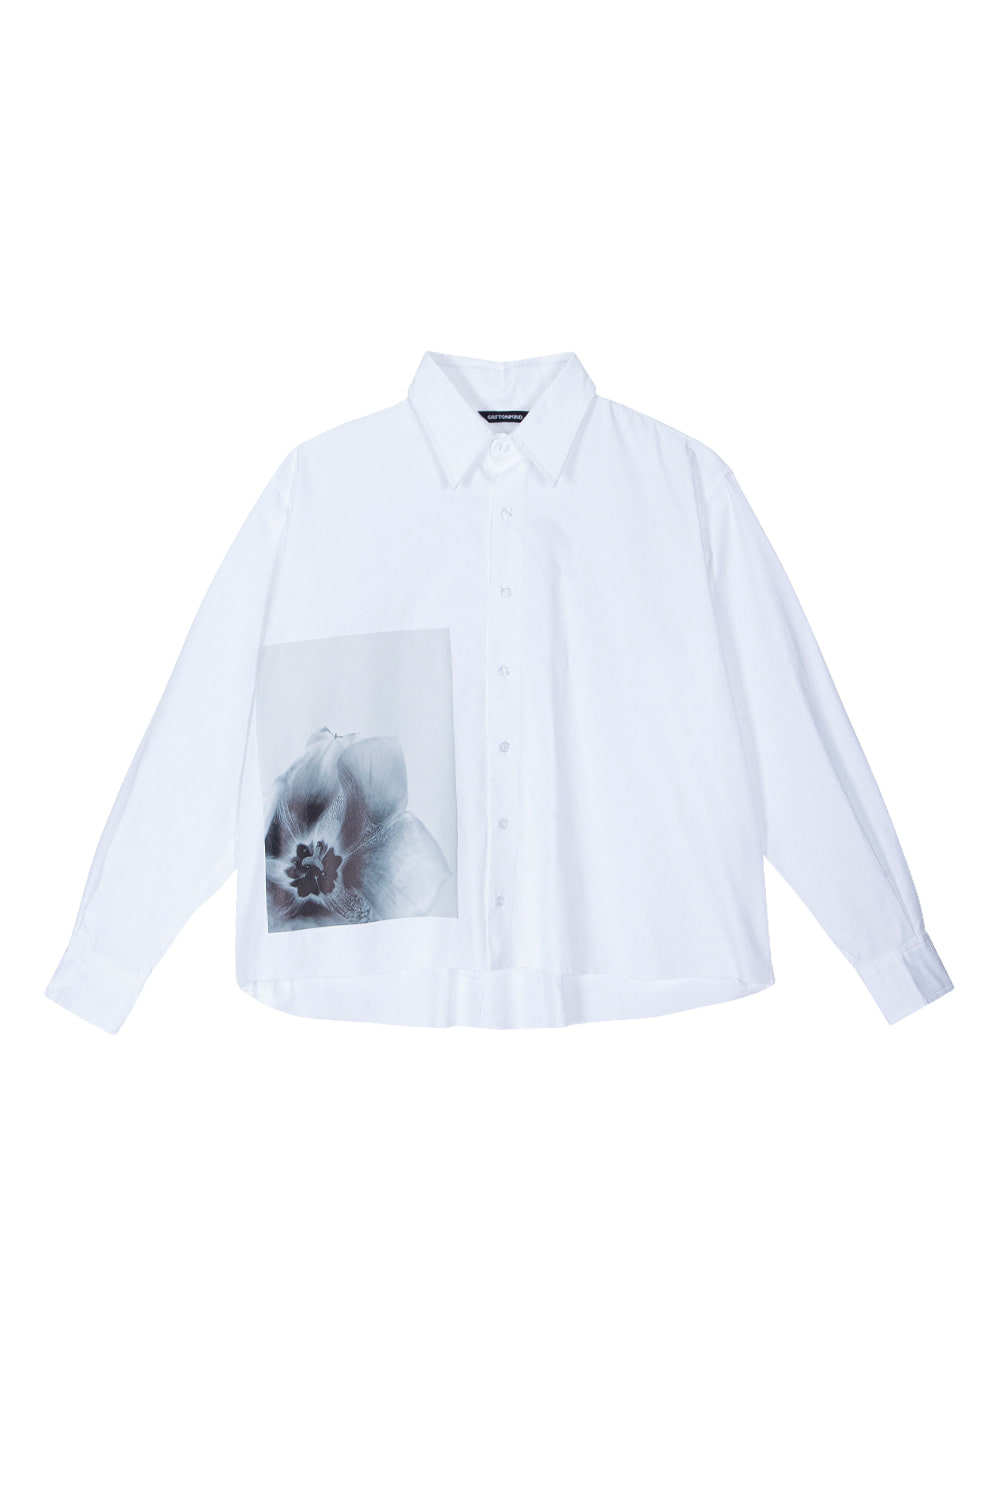 [SALE] PRINTED PATCH CROPPED  DRESS SHIRTS (WHITE)GRAFFITIONMIND